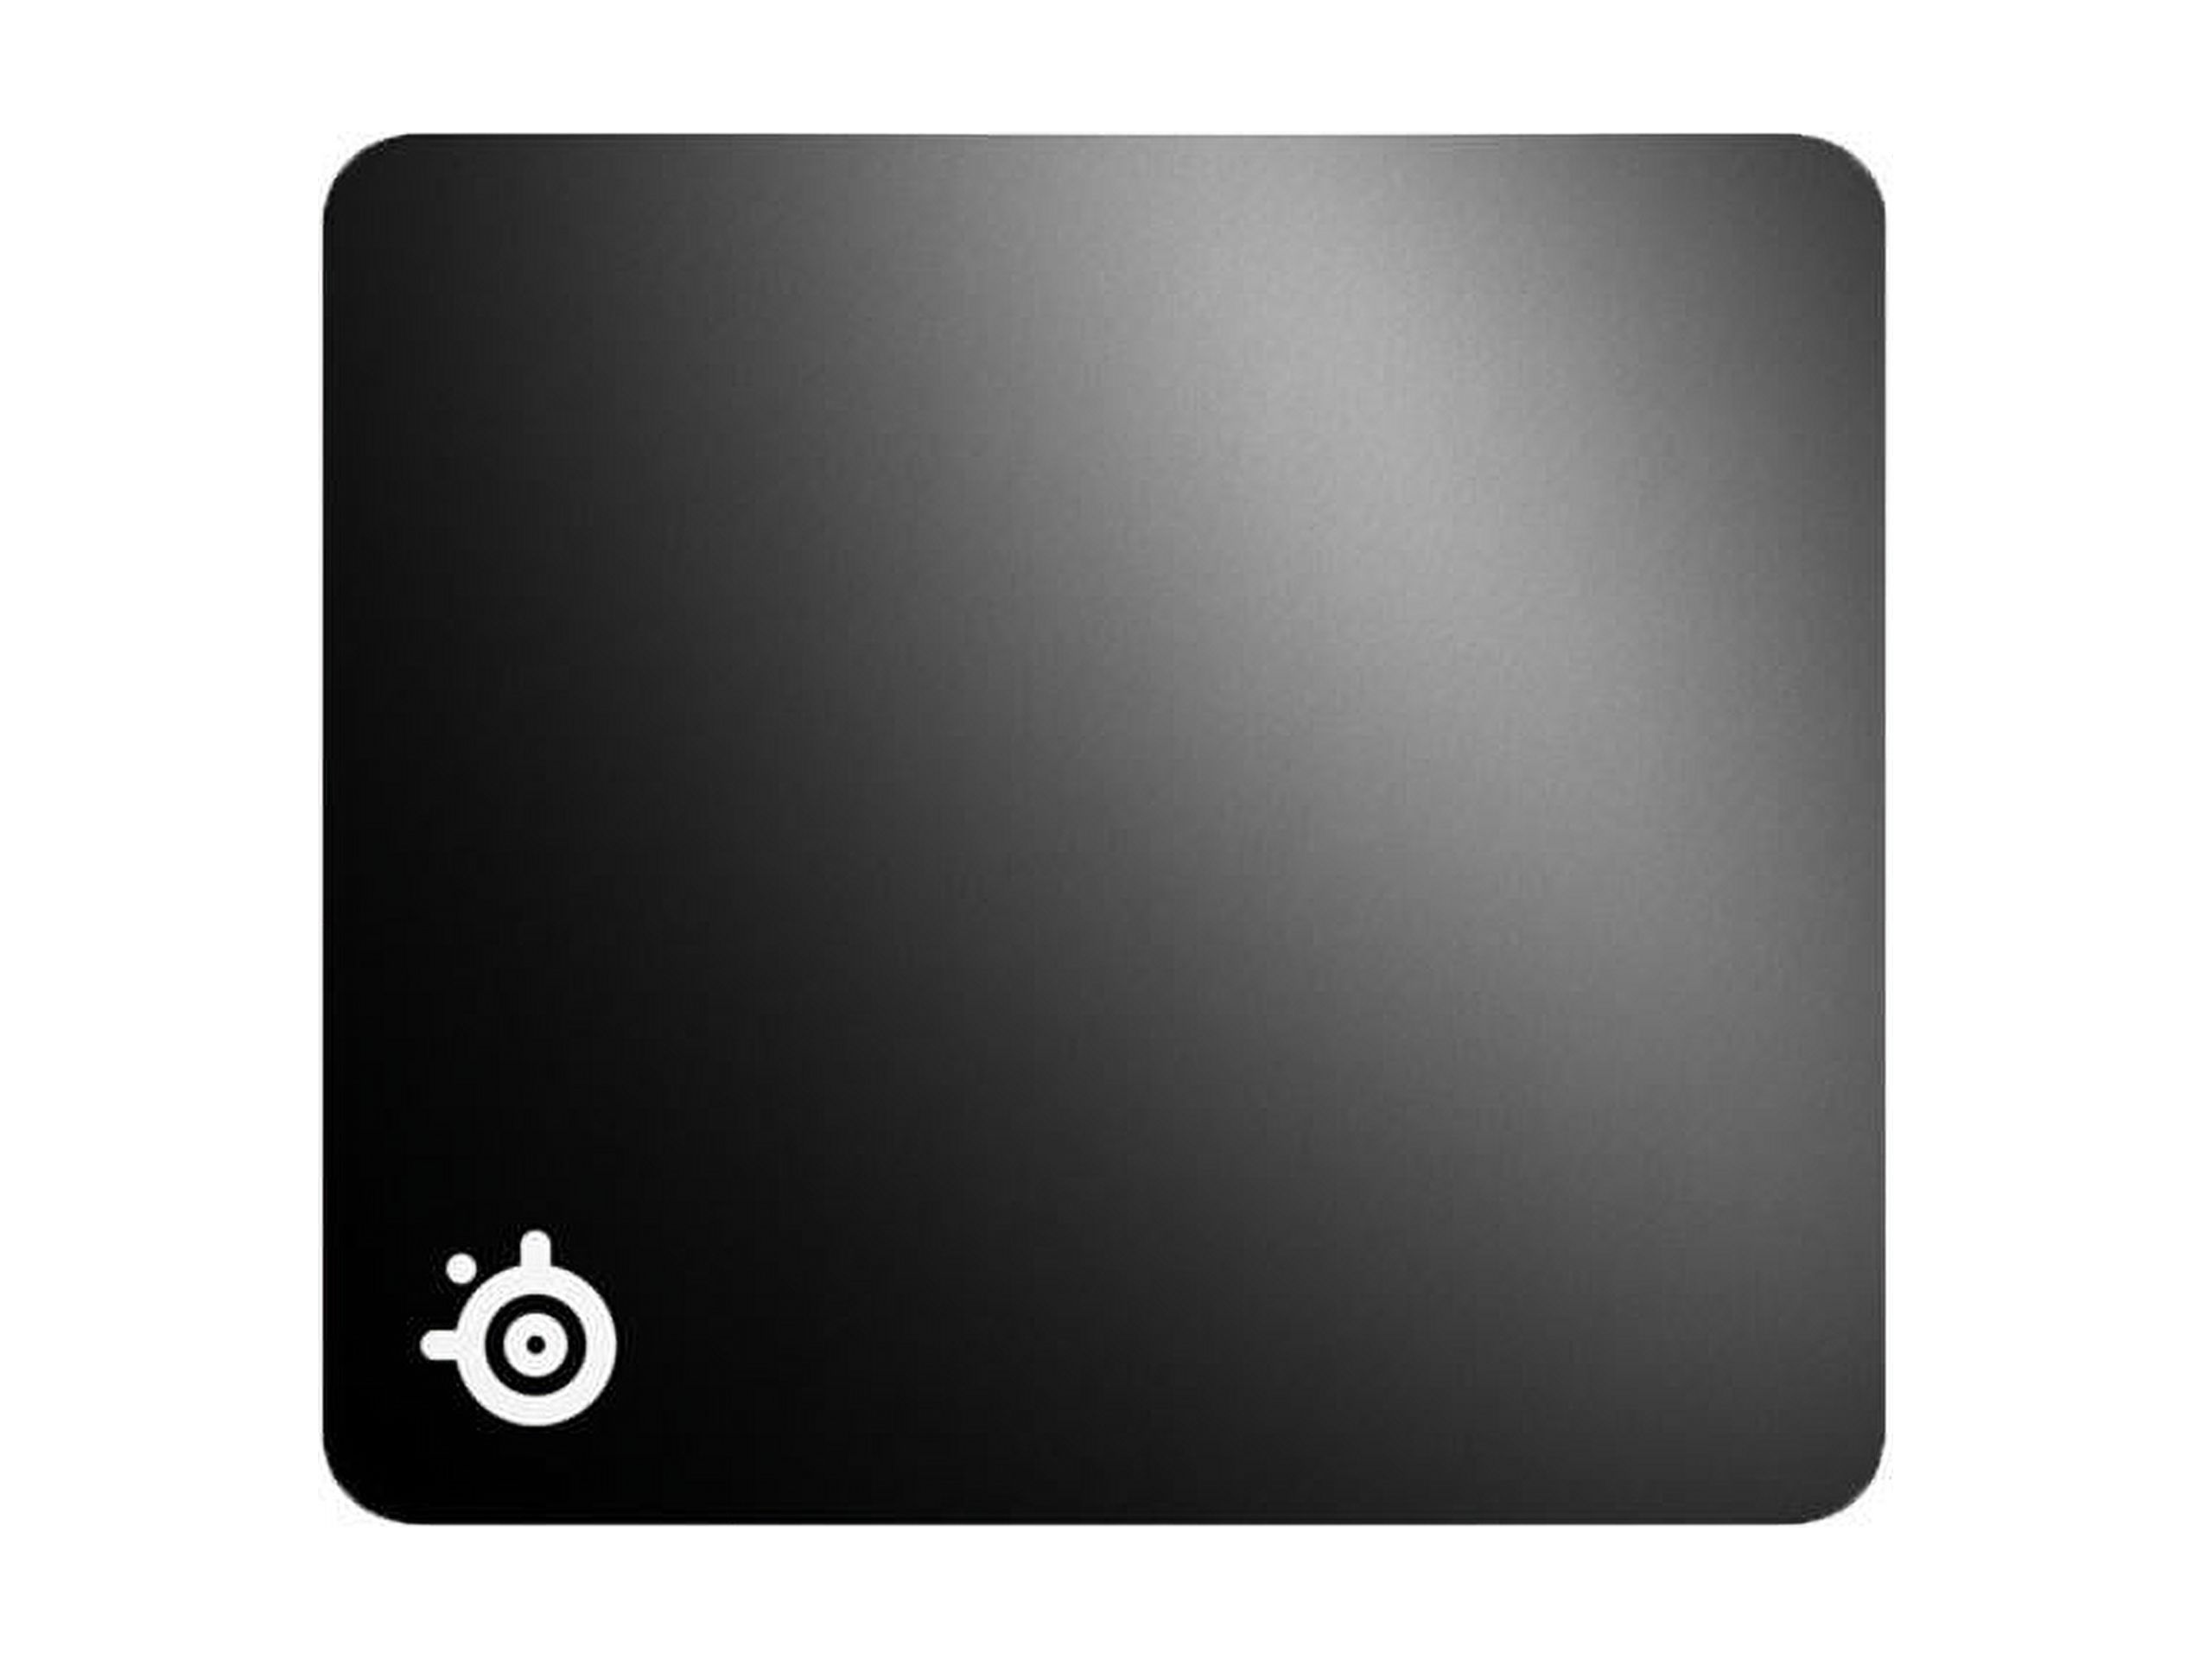 SteelSeries QcK+ Mouse Pad - image 1 of 6